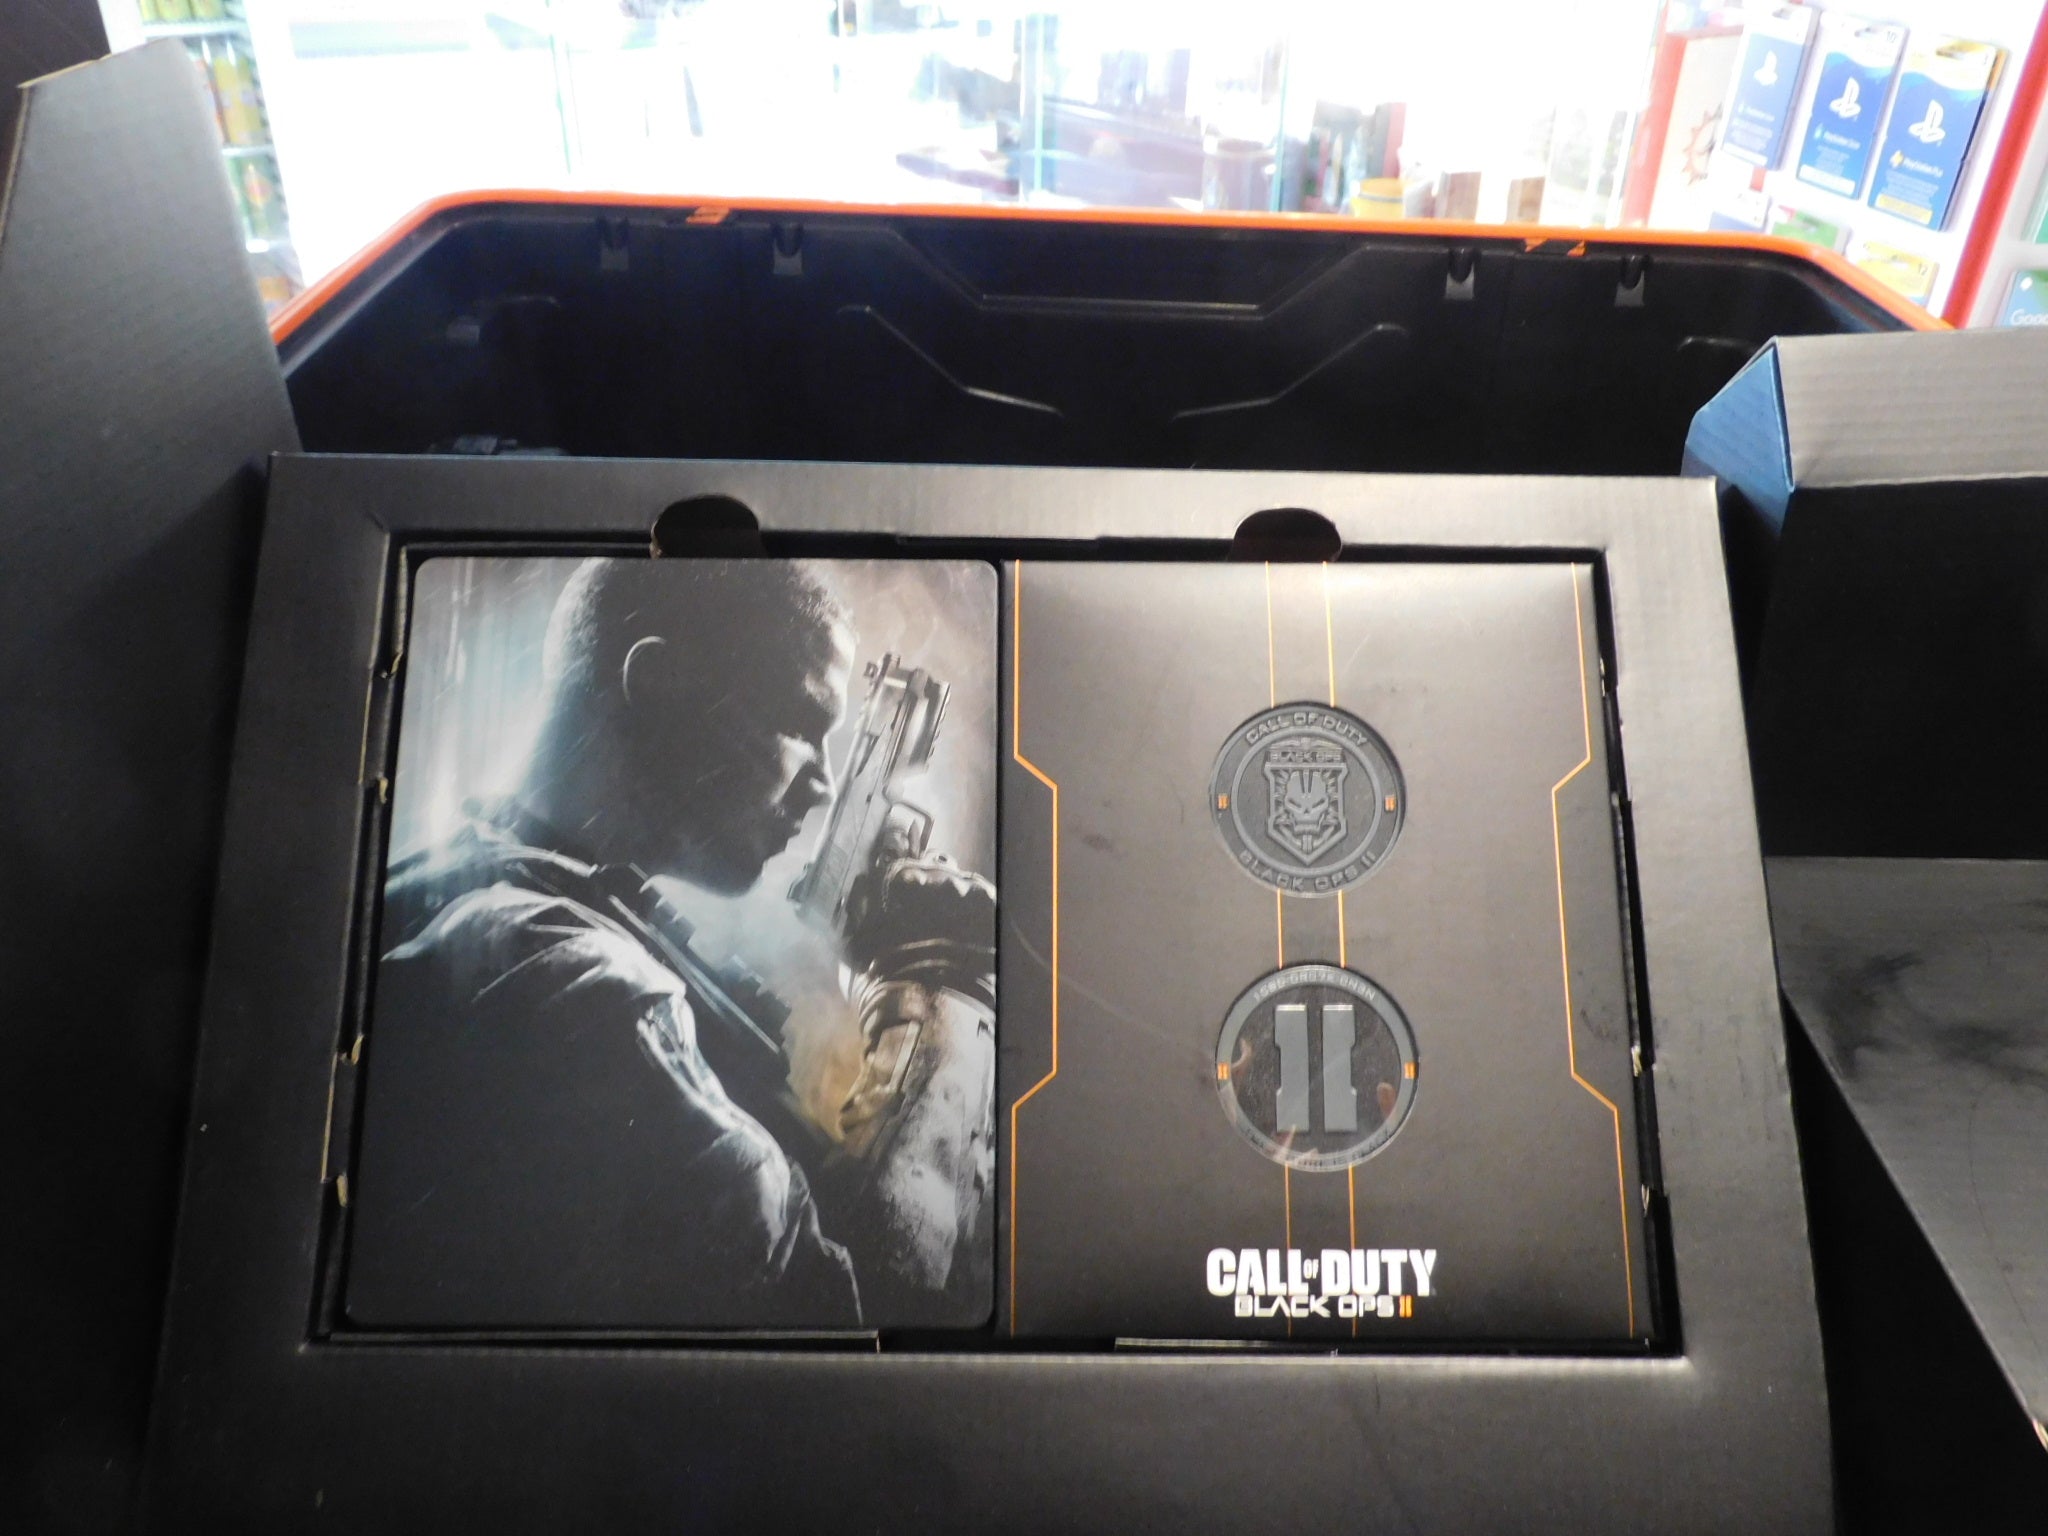 CALL OF DUTY BLACK OPS II CARE PACKAGE